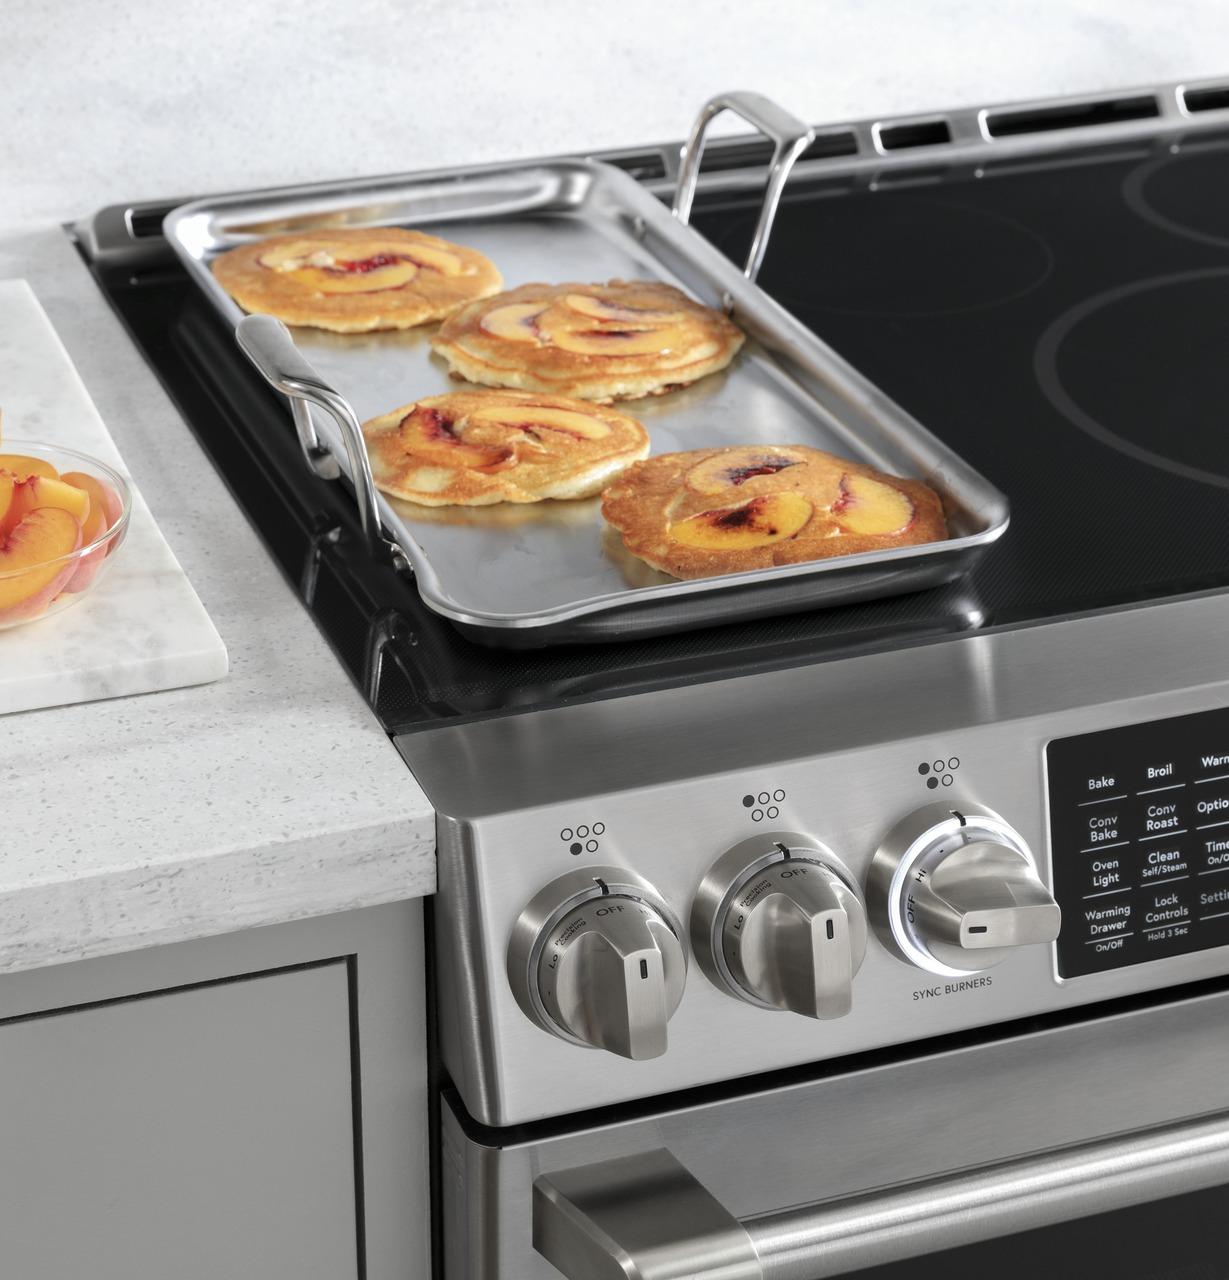 GE Café Induction Cooktops - Syncburners 